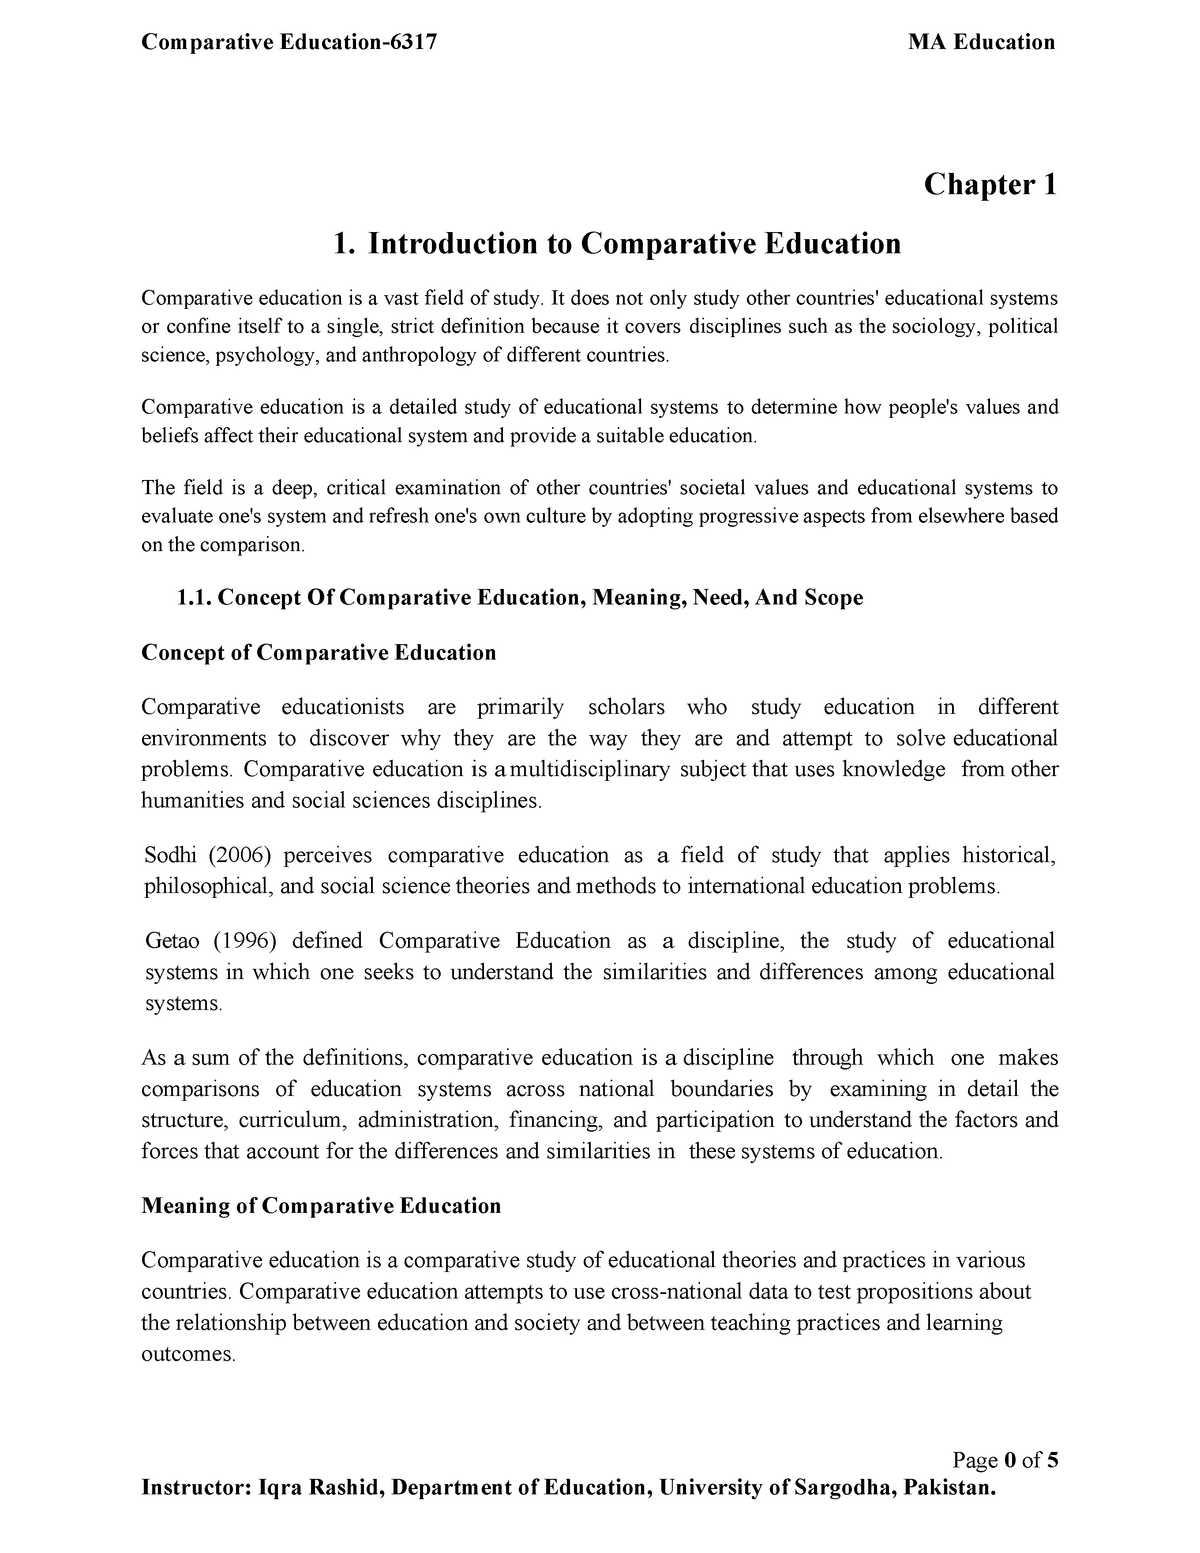 essay about comparative education